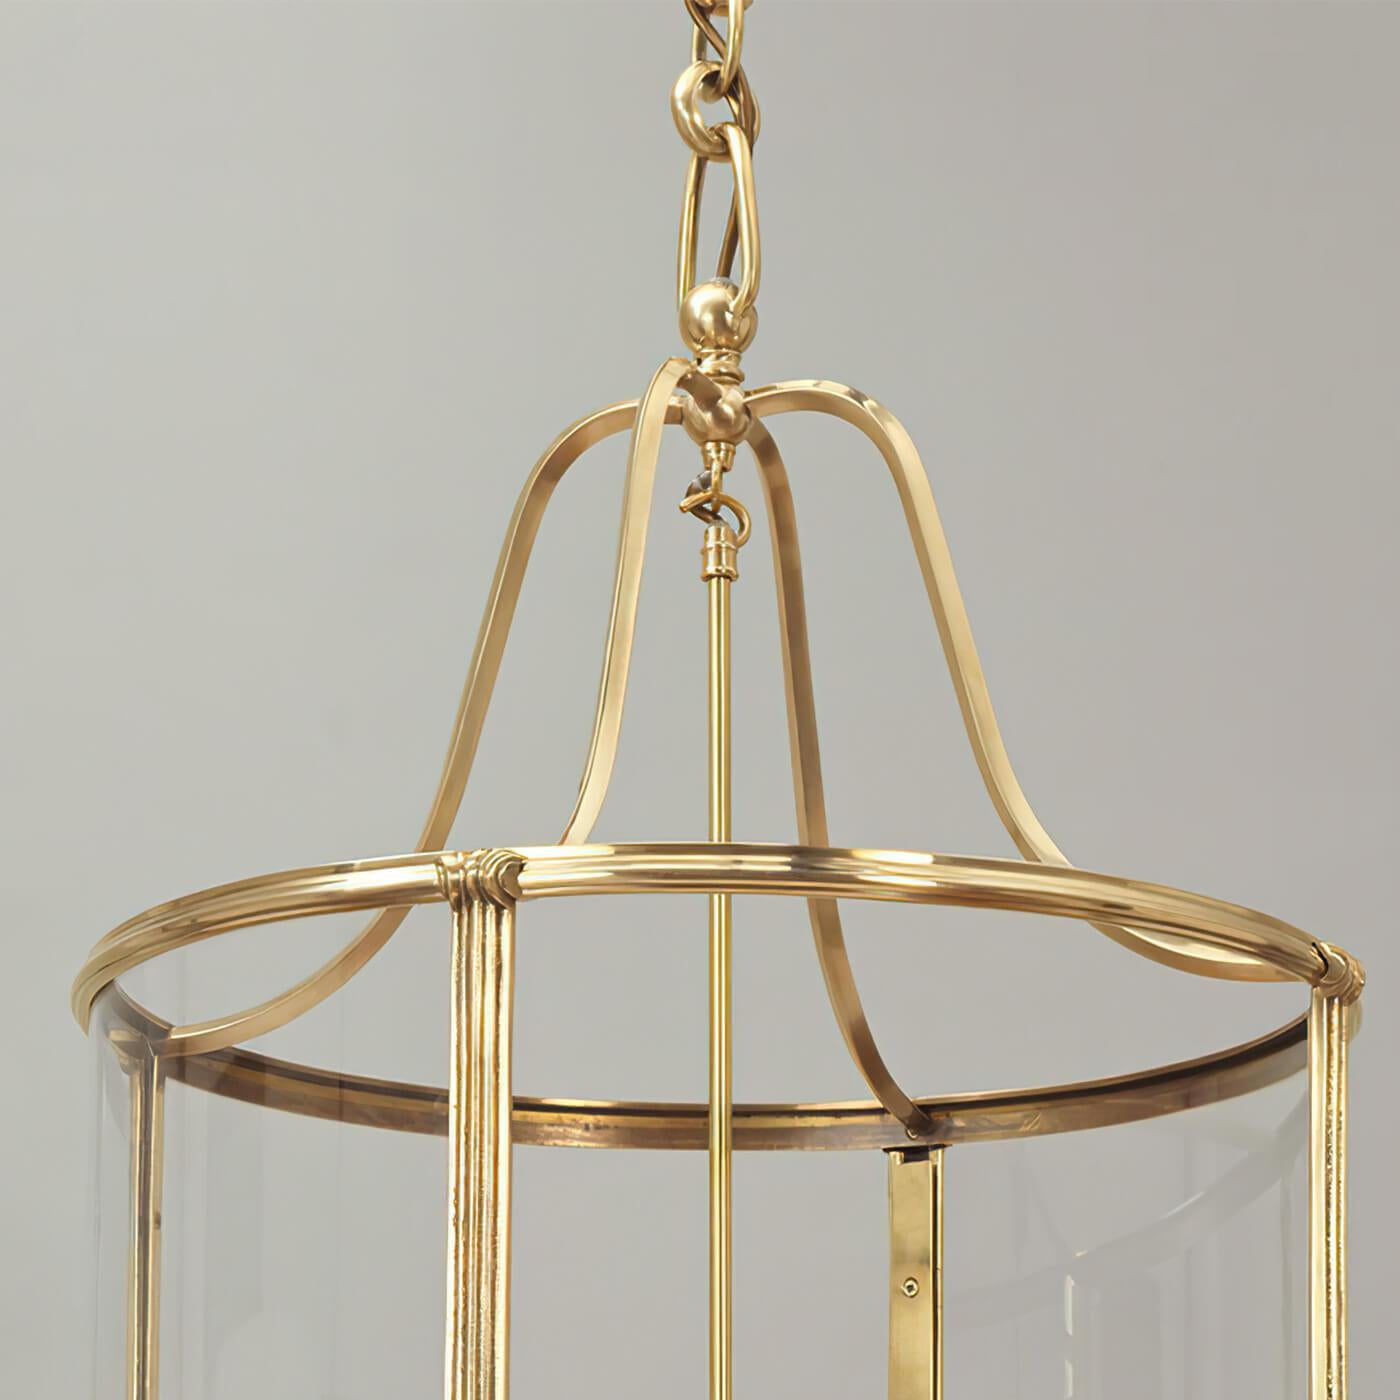 Classic Brass hall lantern and based on a 1940's French design, this hall lantern marries a flowing shape with clean lines. The brass echoes the warmth of the candles while the ribbed frame is highlighted with small pieces of classical